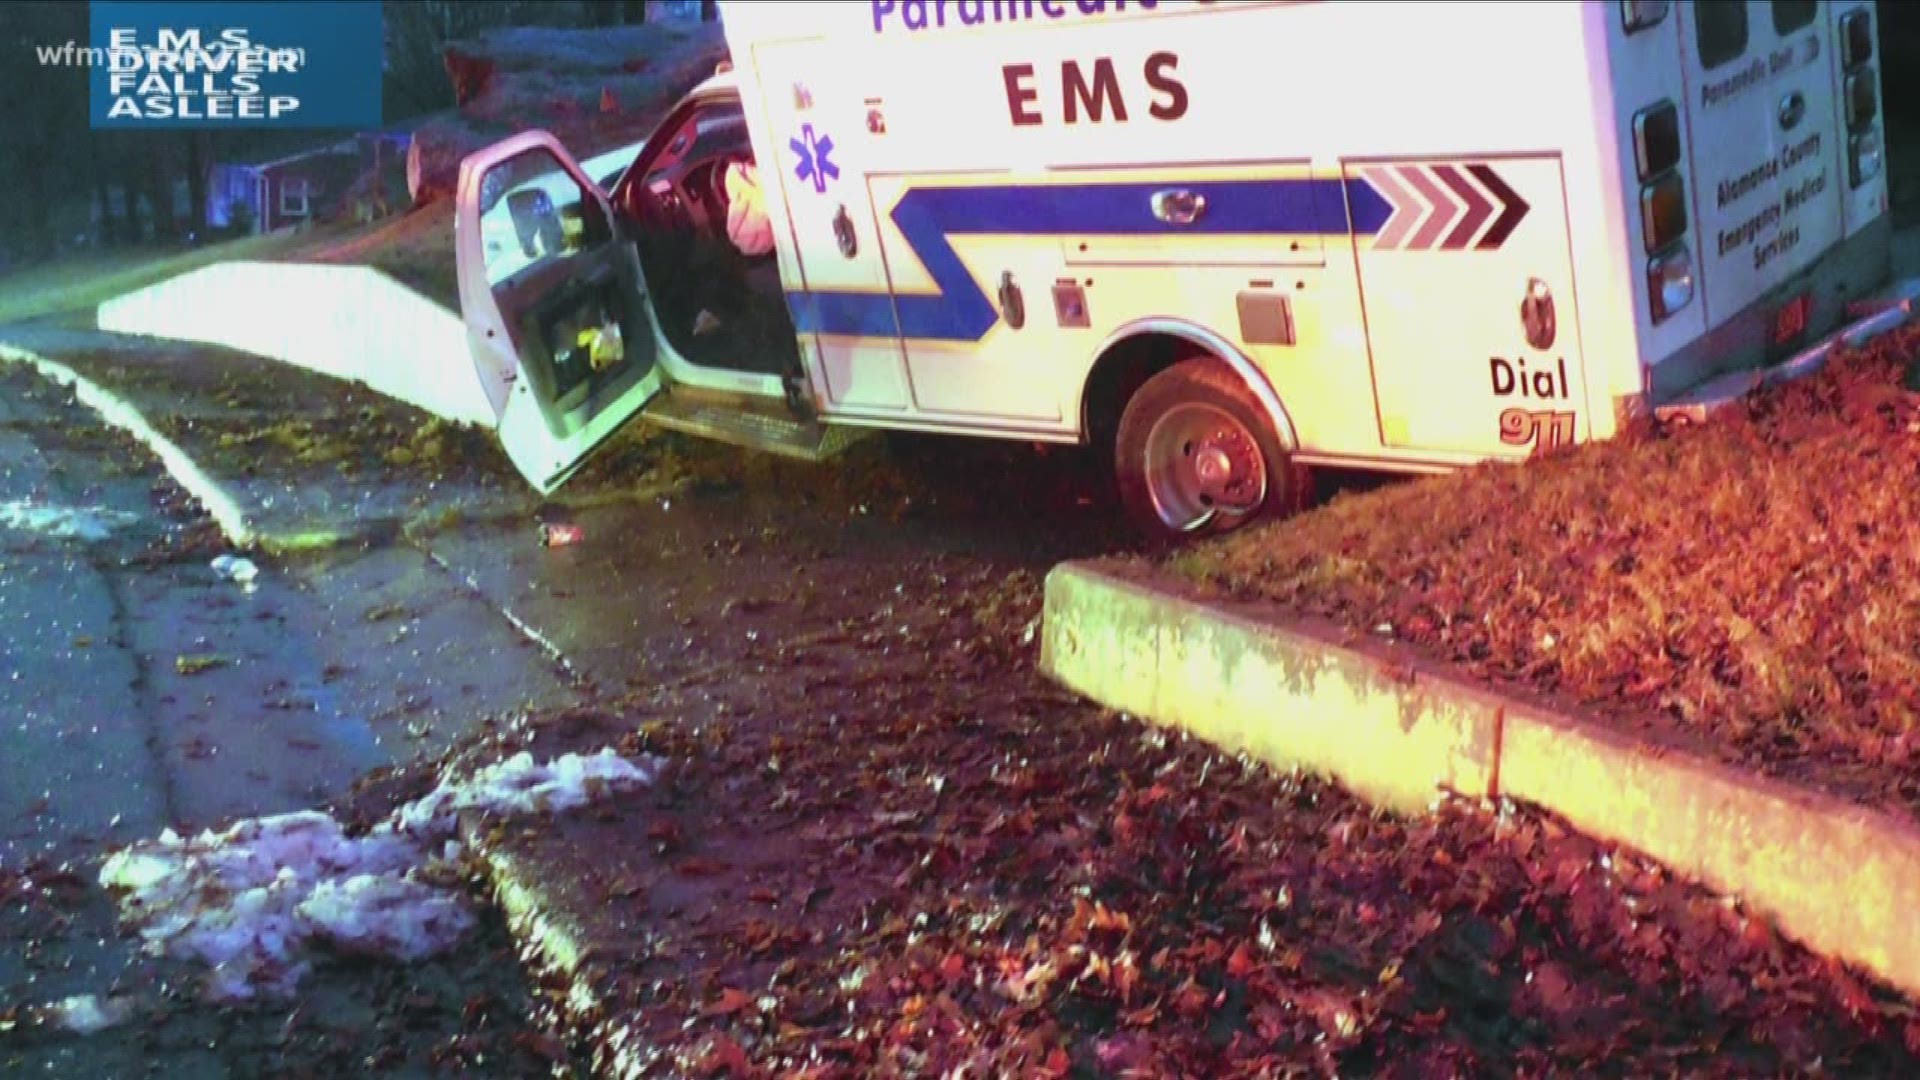 An ambulance driver fell asleep at the wheel and crashed into a concrete wall.